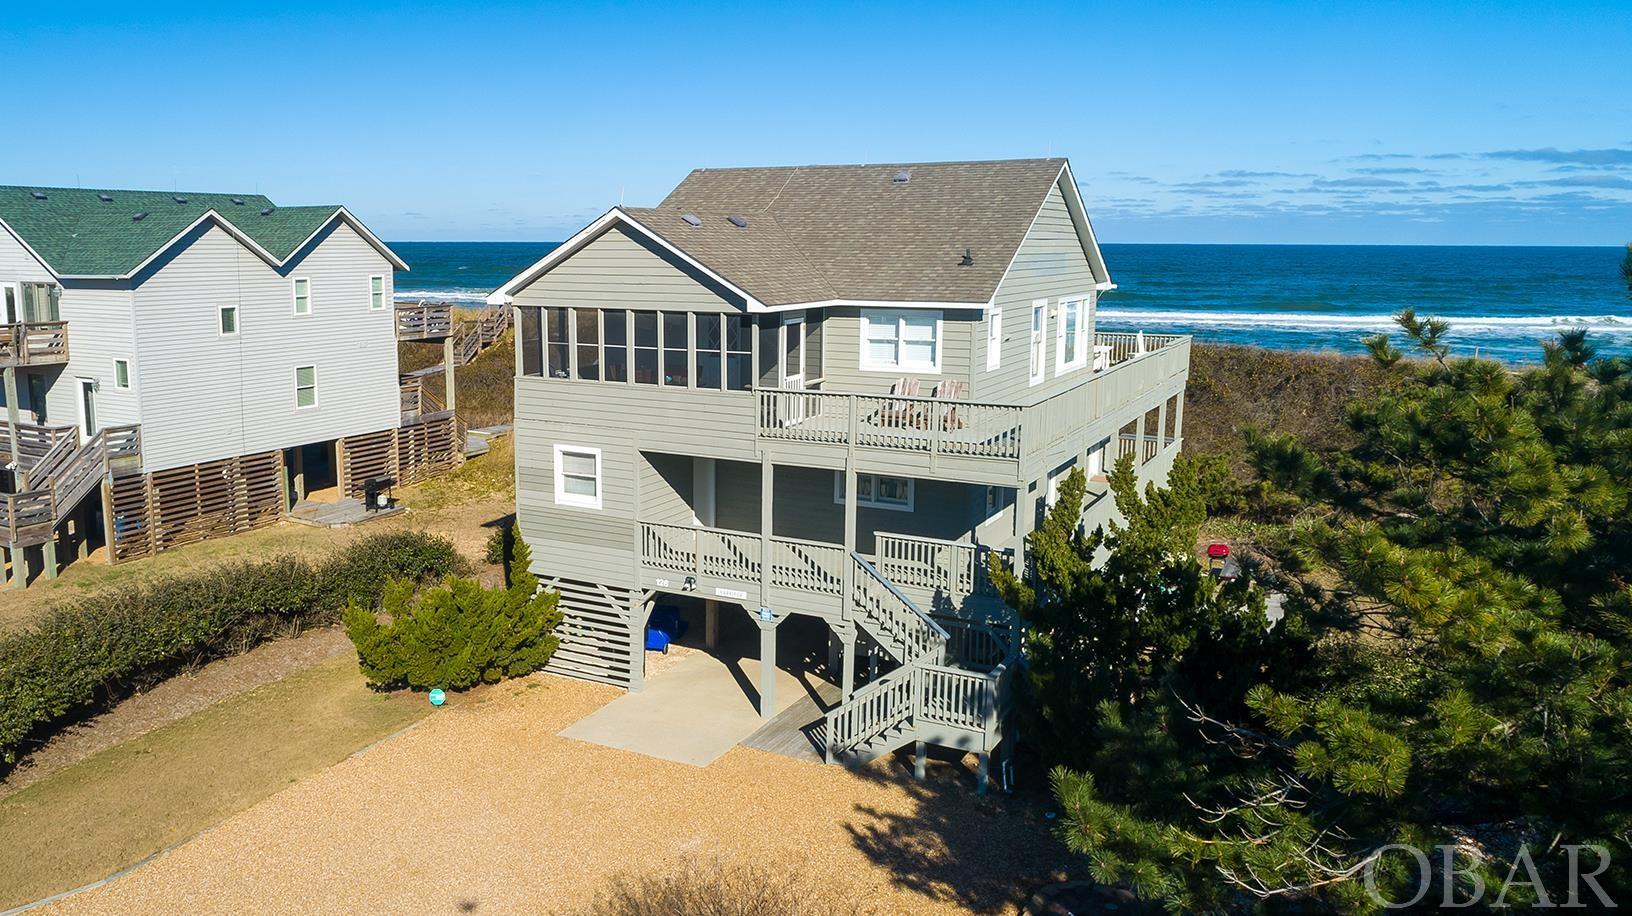 Stunning sunrise views over the Atlantic from this beautiful Sanderling oceanfront home! Beautifully decorated with bright, coastal décor and theme, this home is sure to please. Updated kitchen with tile floor, bar top seating, and newer appliances. Nice screened in porch off the kitchen area for when you want to enjoy your morning coffee, dine outdoors, or just read or relax and see and smell the ocean. Very spacious, open and bright top floor with fantastic views, complete with a sun room/siting area. Powder room located on top floor too. Mid level offers two en-suite bedrooms (one queen, one king), a bunk room and a twin room, each with their own bathroom. Great decks on mid level too! Great south side sun deck with surrounding landscaped area is perfect for afternoon cocktails and grilling. Relax in the hammocks under the house to enjoy those cool ocean breezes or soak up the sun in one of the rockers on the top floor sun decks. This property is well protected with a strong, vegetated dune. Enjoy all the joys of beachfront living with the beautiful Duck beach right in your backyard.  Enjoy the amenities the exclusive Sanderling has to offer, including community pool and tennis. Close to Duck Village for shopping and dining, and enjoy the nearby Sanderling restaurants, just minutes away. And don't forget the world famous Sanderling Spa! View the virtual tour of this home by clicking link or cut/paste into your browser: https://my.matterport.com/show/?m=WQY5dmU2Y1s&mls=1